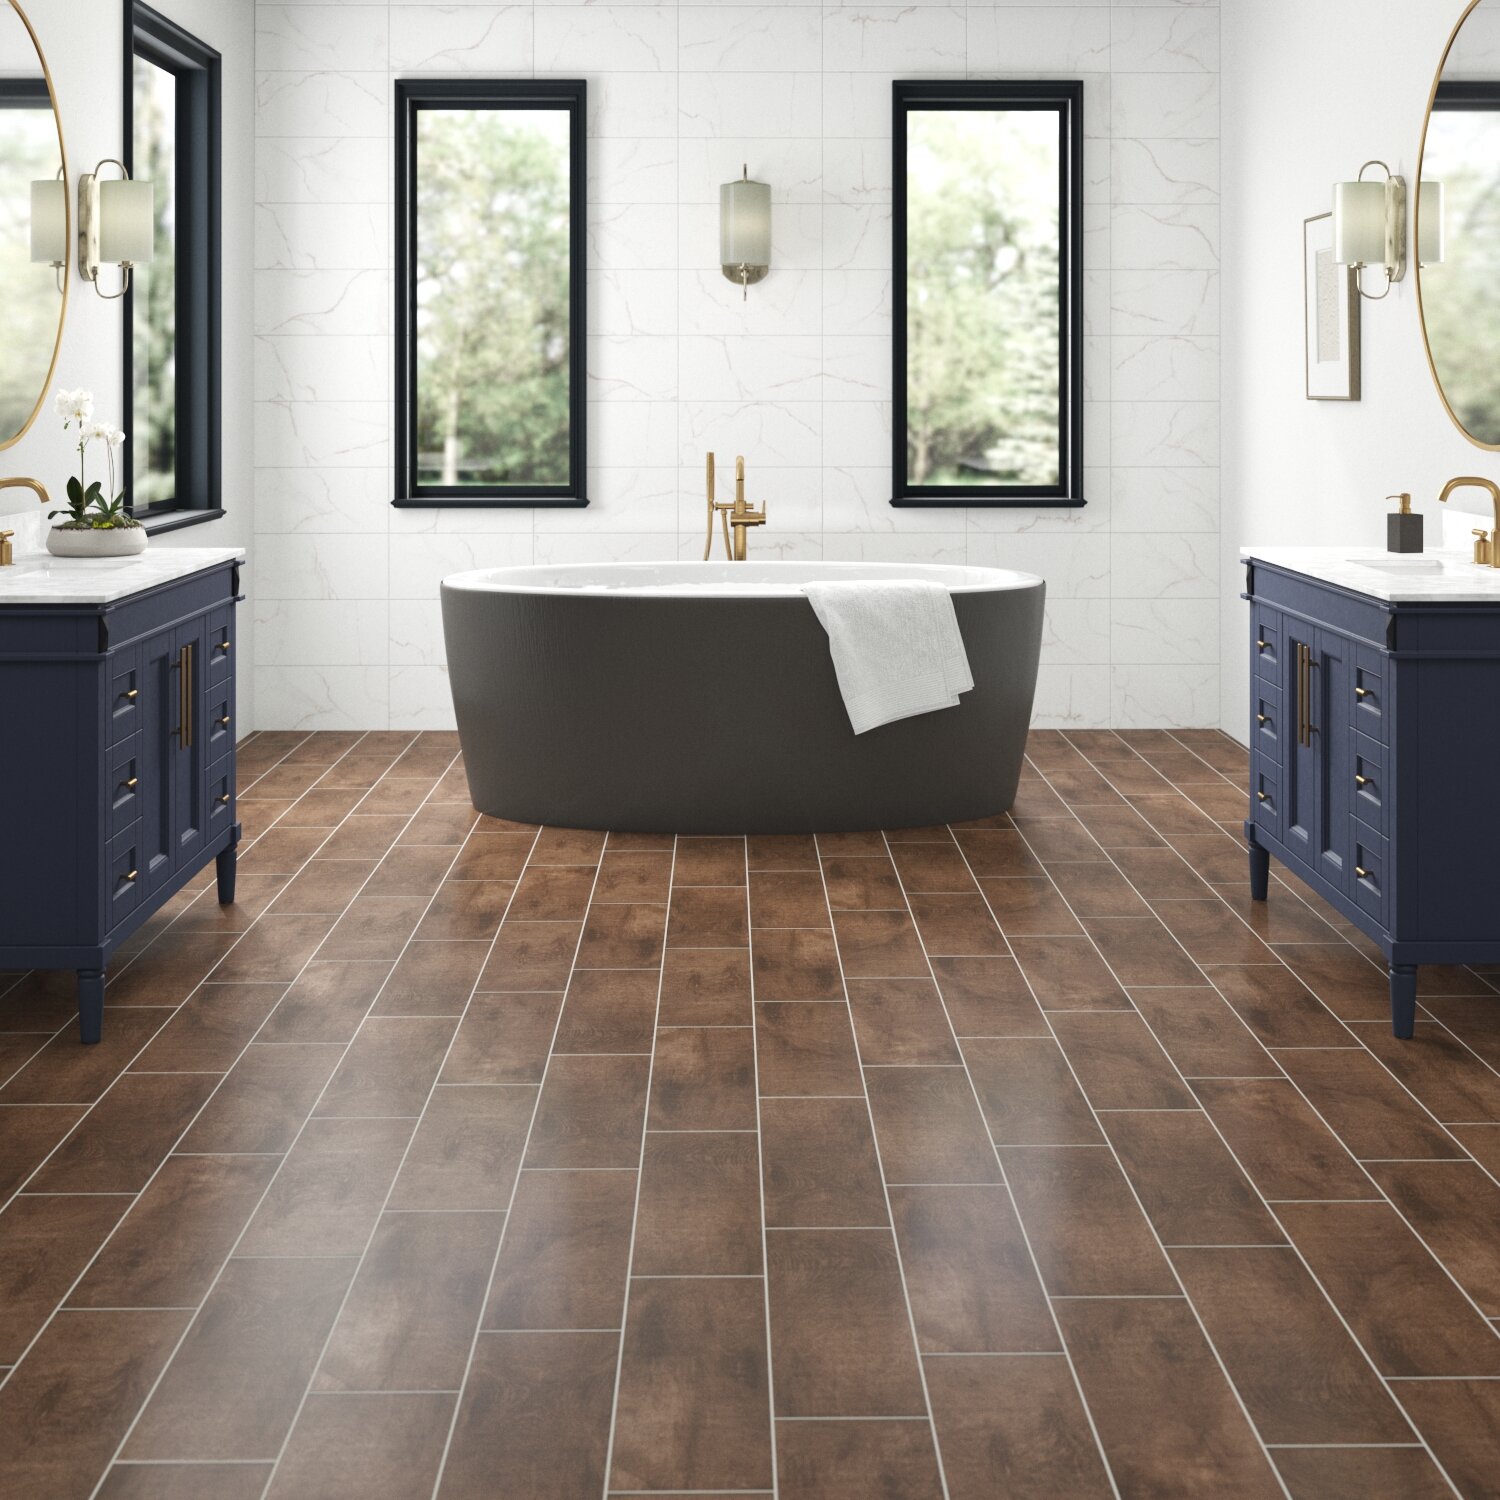 Bathroom Tile And Trends At Lowe S